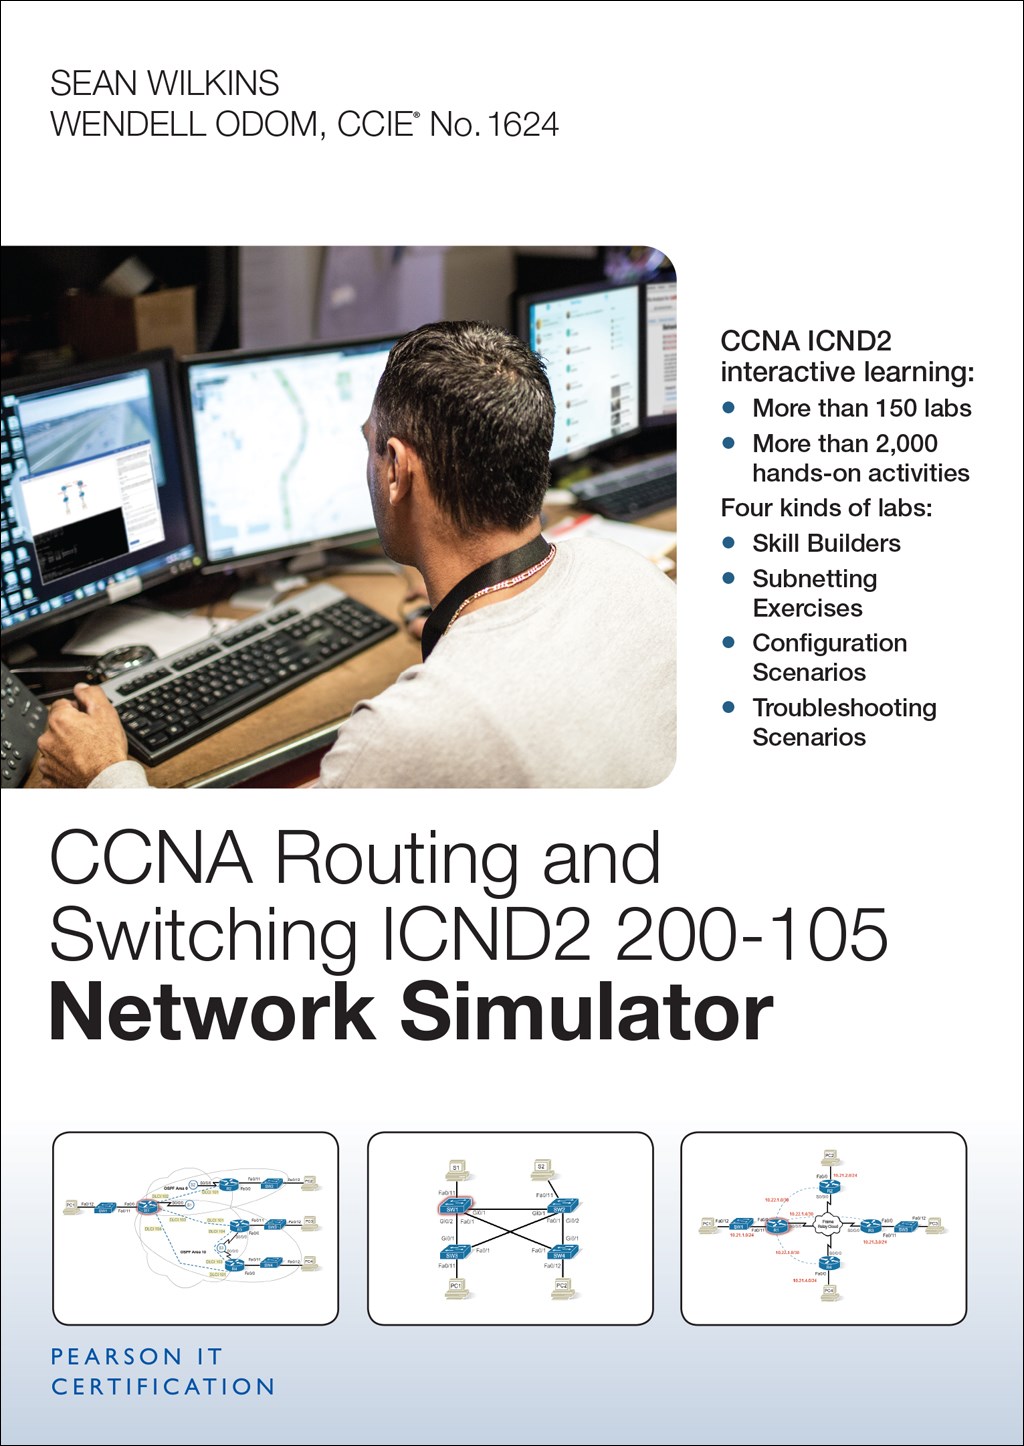 CCNA Routing and Switching ICND2 200-105 Network Simulator, Download Version